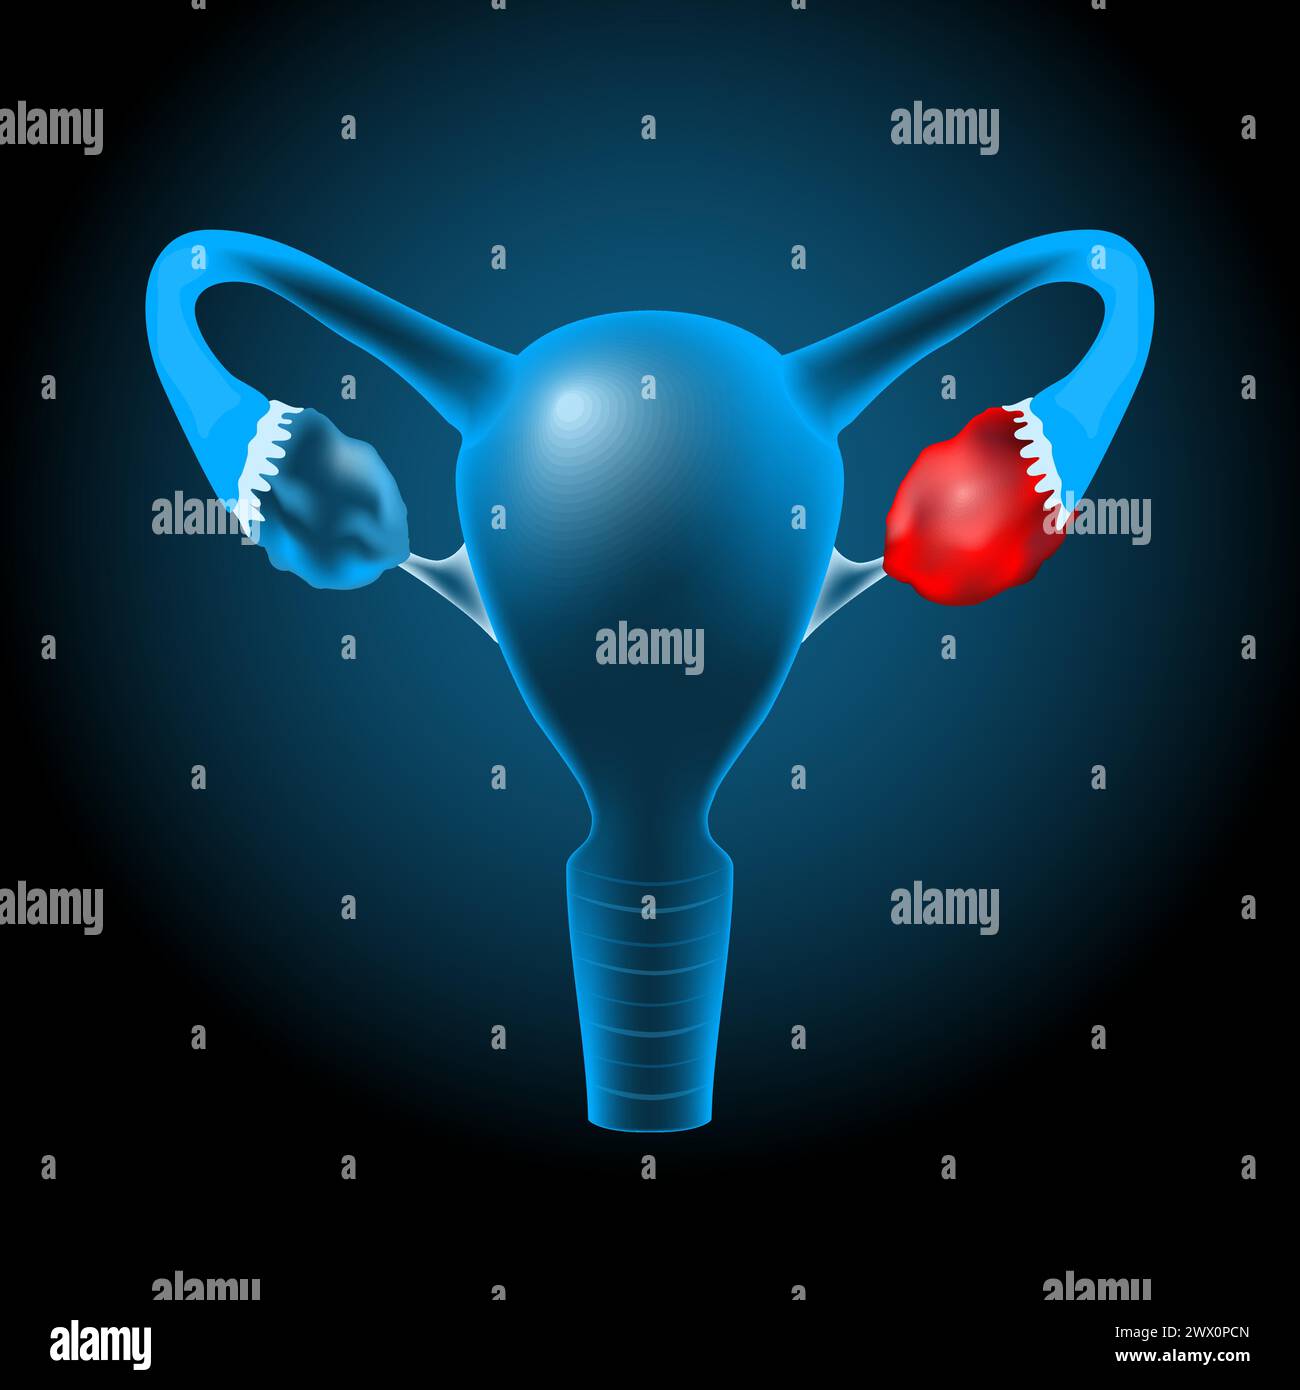 Realistic transparent blue human uterus with glowing effect on dark background. Ovarian cyst or tumor that occurs in the ovary. Vector illustration li Stock Vector